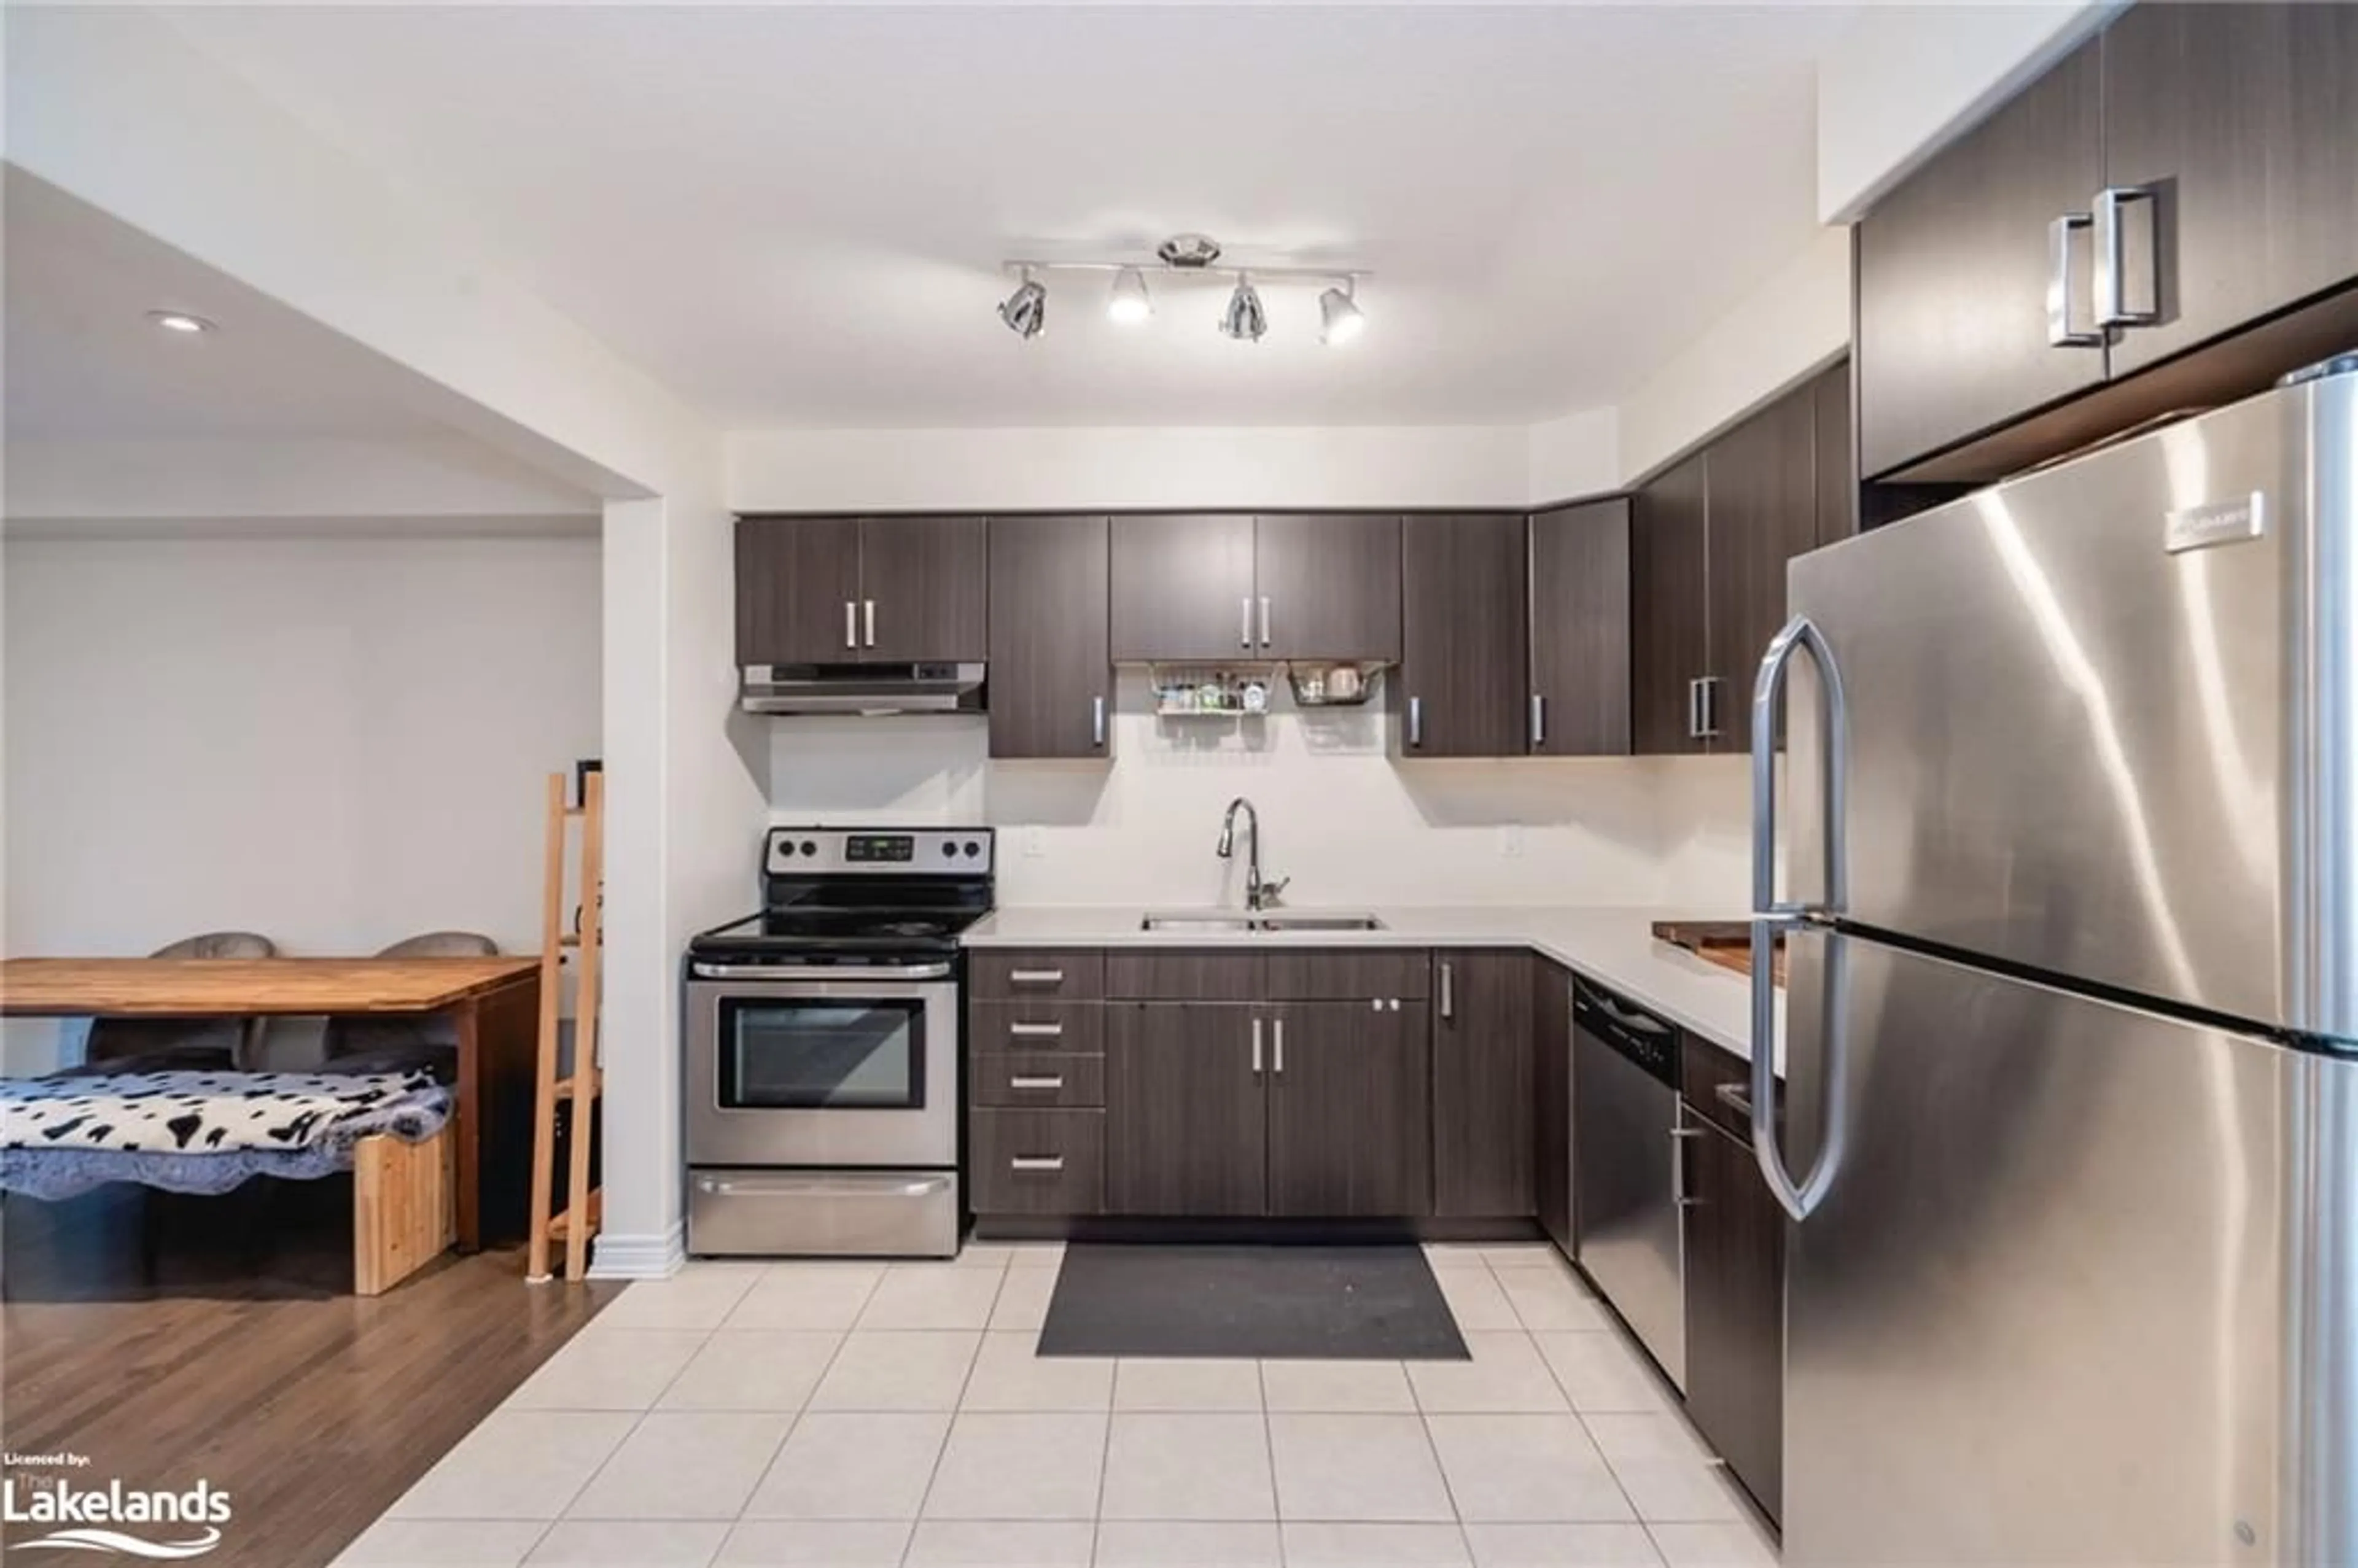 Standard kitchen for 972 Cook Dr, Midland Ontario L4R 0E4